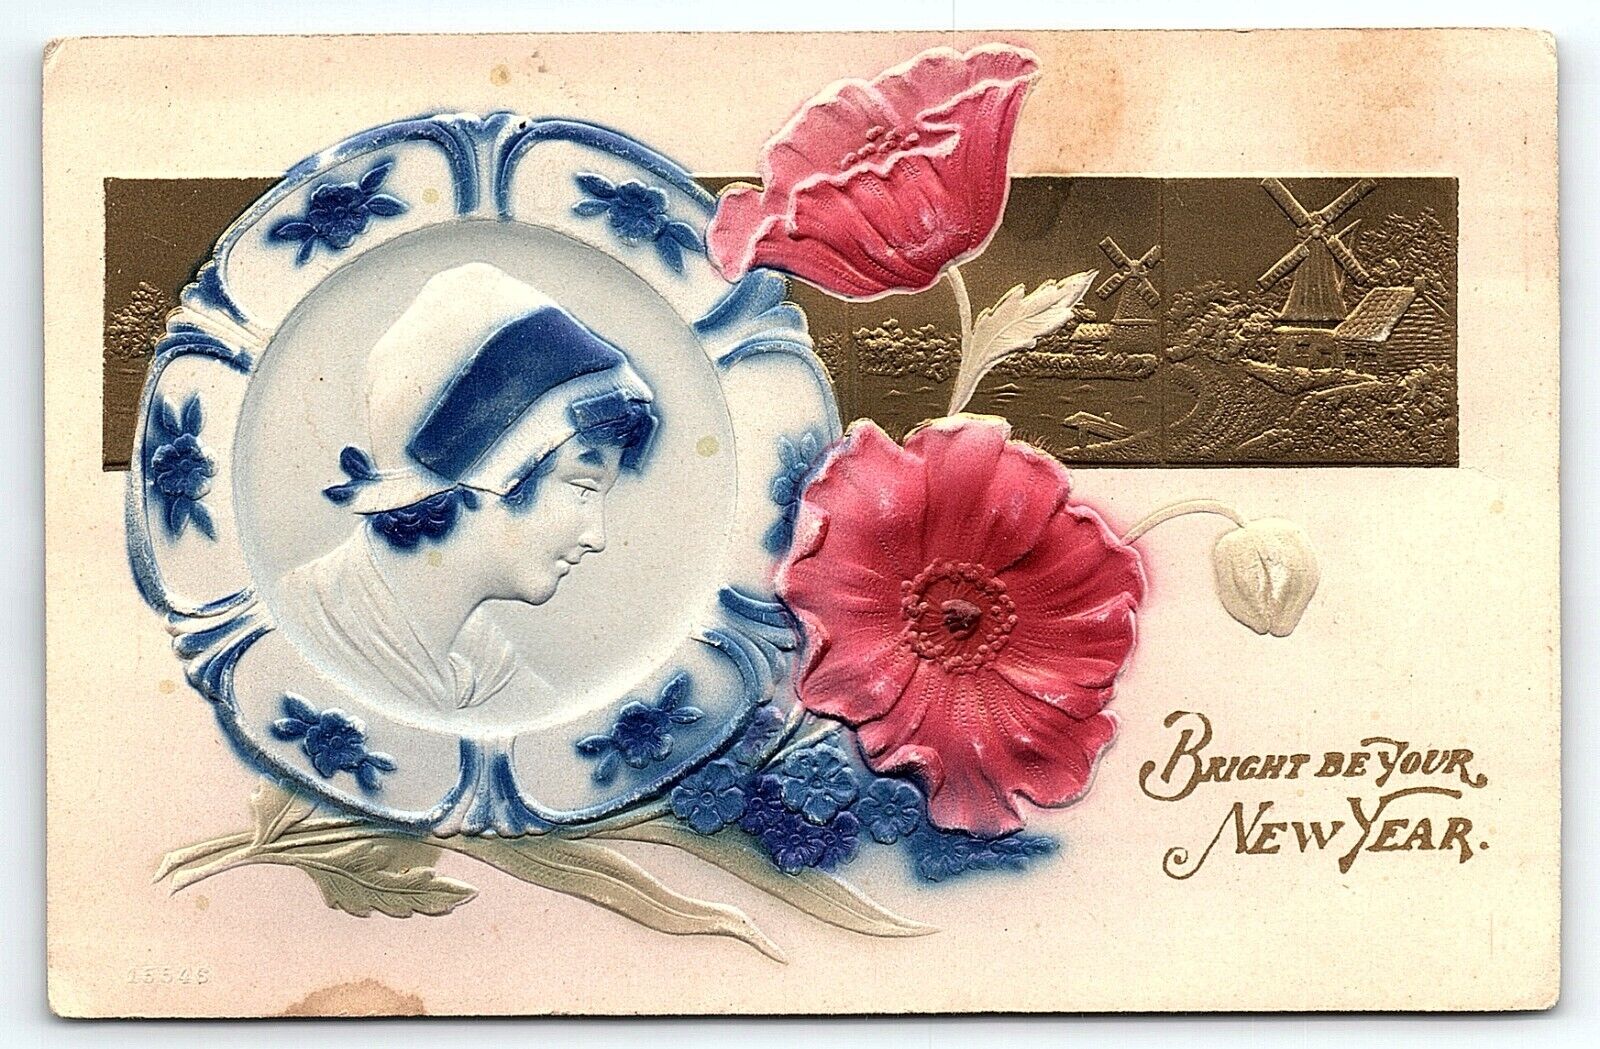 c1910 BRIGHT BE YOUR NEW YEAR FLORAL BLUE WILLOW PLATE EMBOSSED POSTCARD P3370